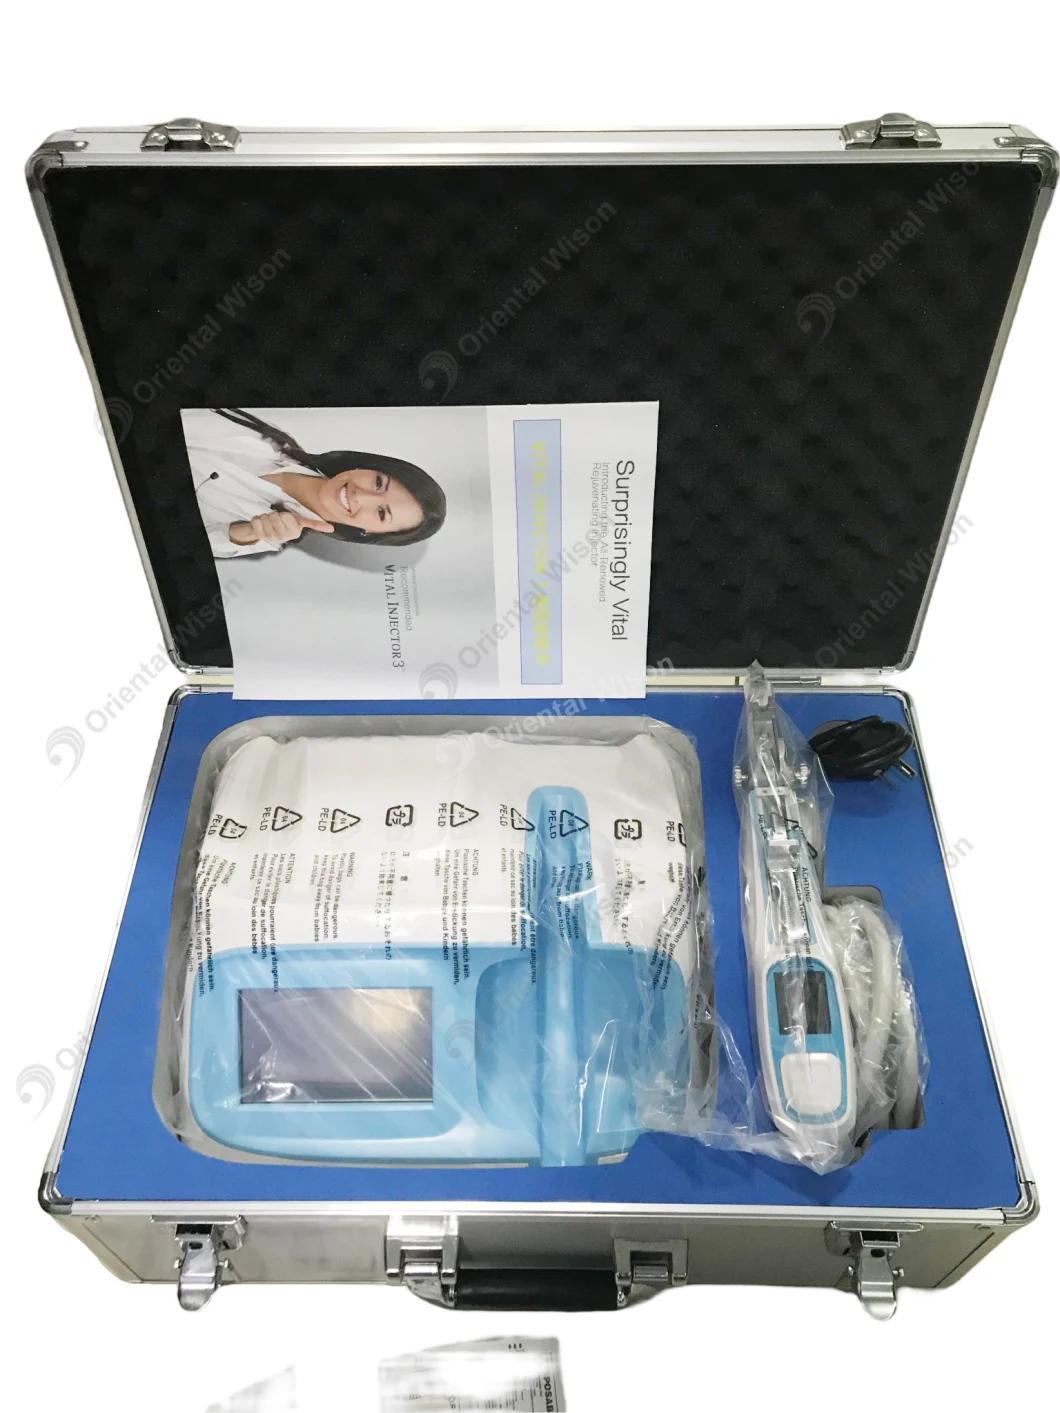 Professional Prp Meso Injector Mesotherapy Gun Mesogun with 5/9 Pins Multi Meso Therapy Needles Supplier 32g Micro Mesotherapy Gun Prp Injector